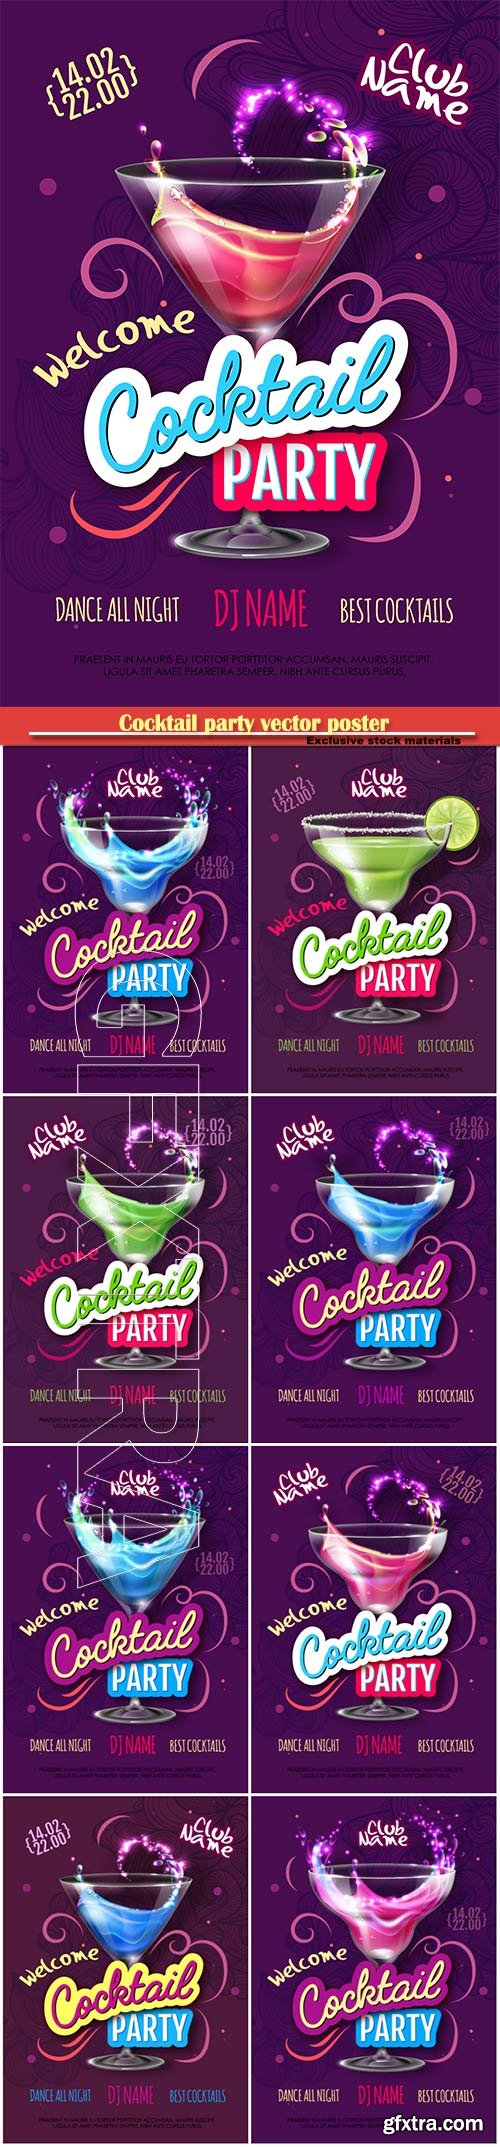 Cocktail party vector poster in eclectic modern style, Valentine\'s Day